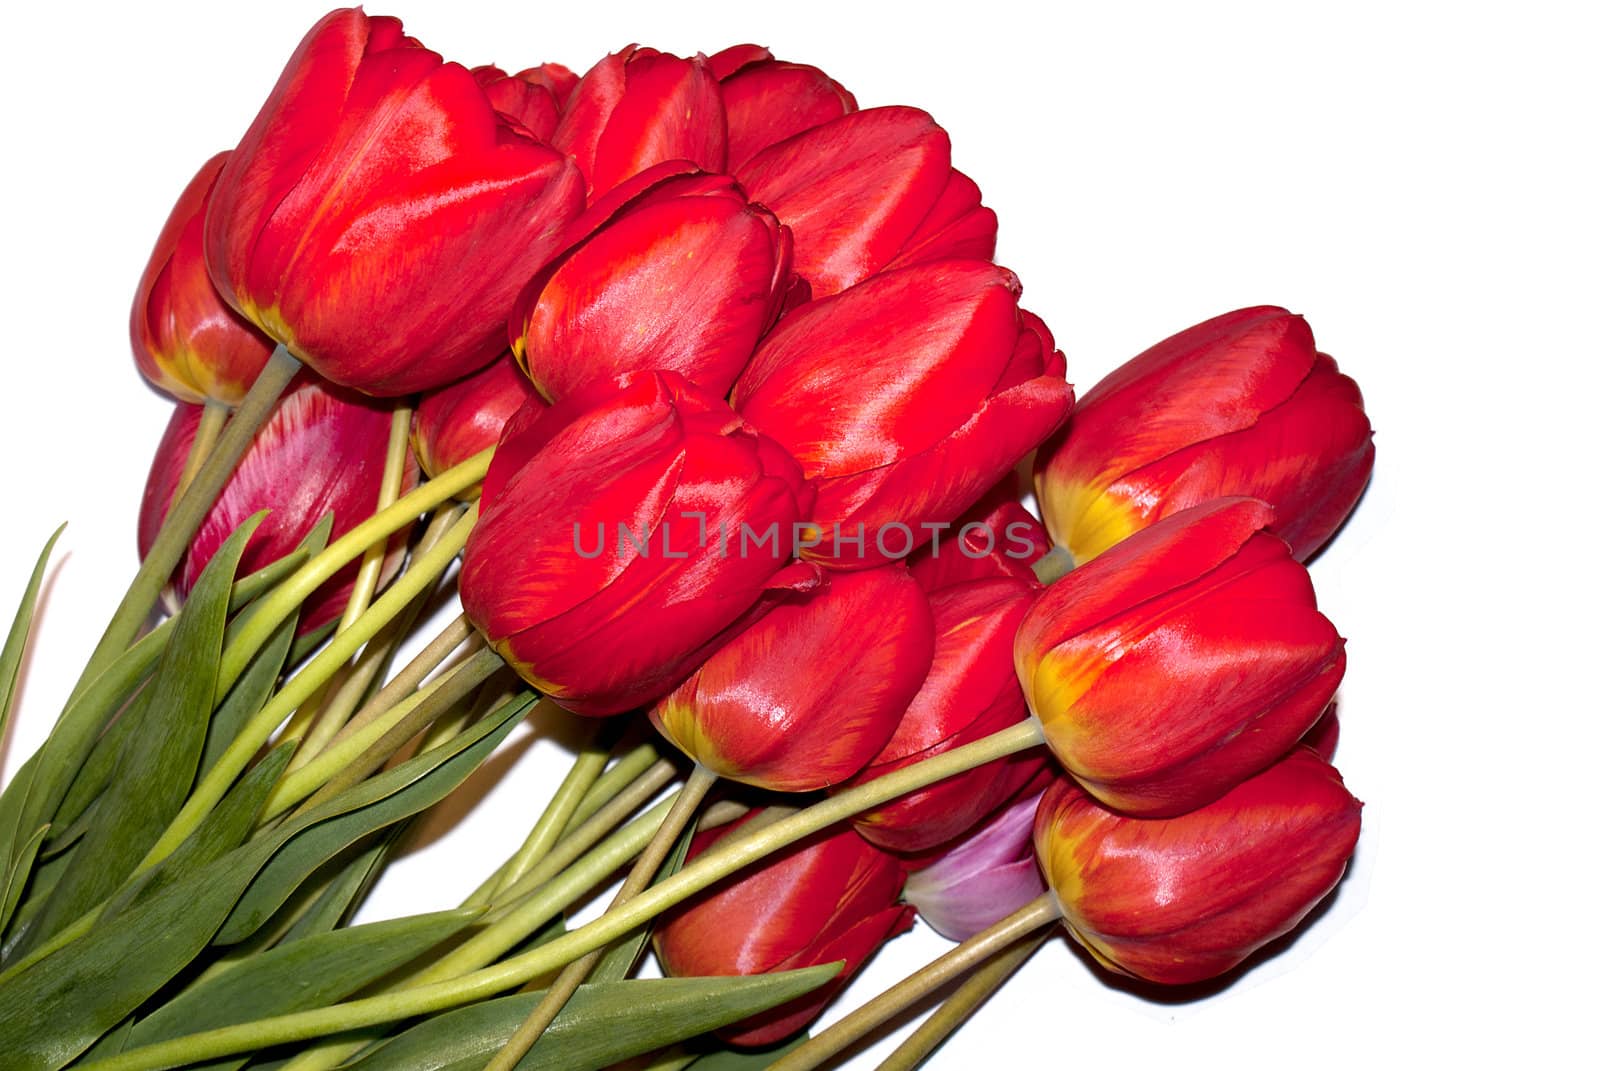 Spring tulips over white background